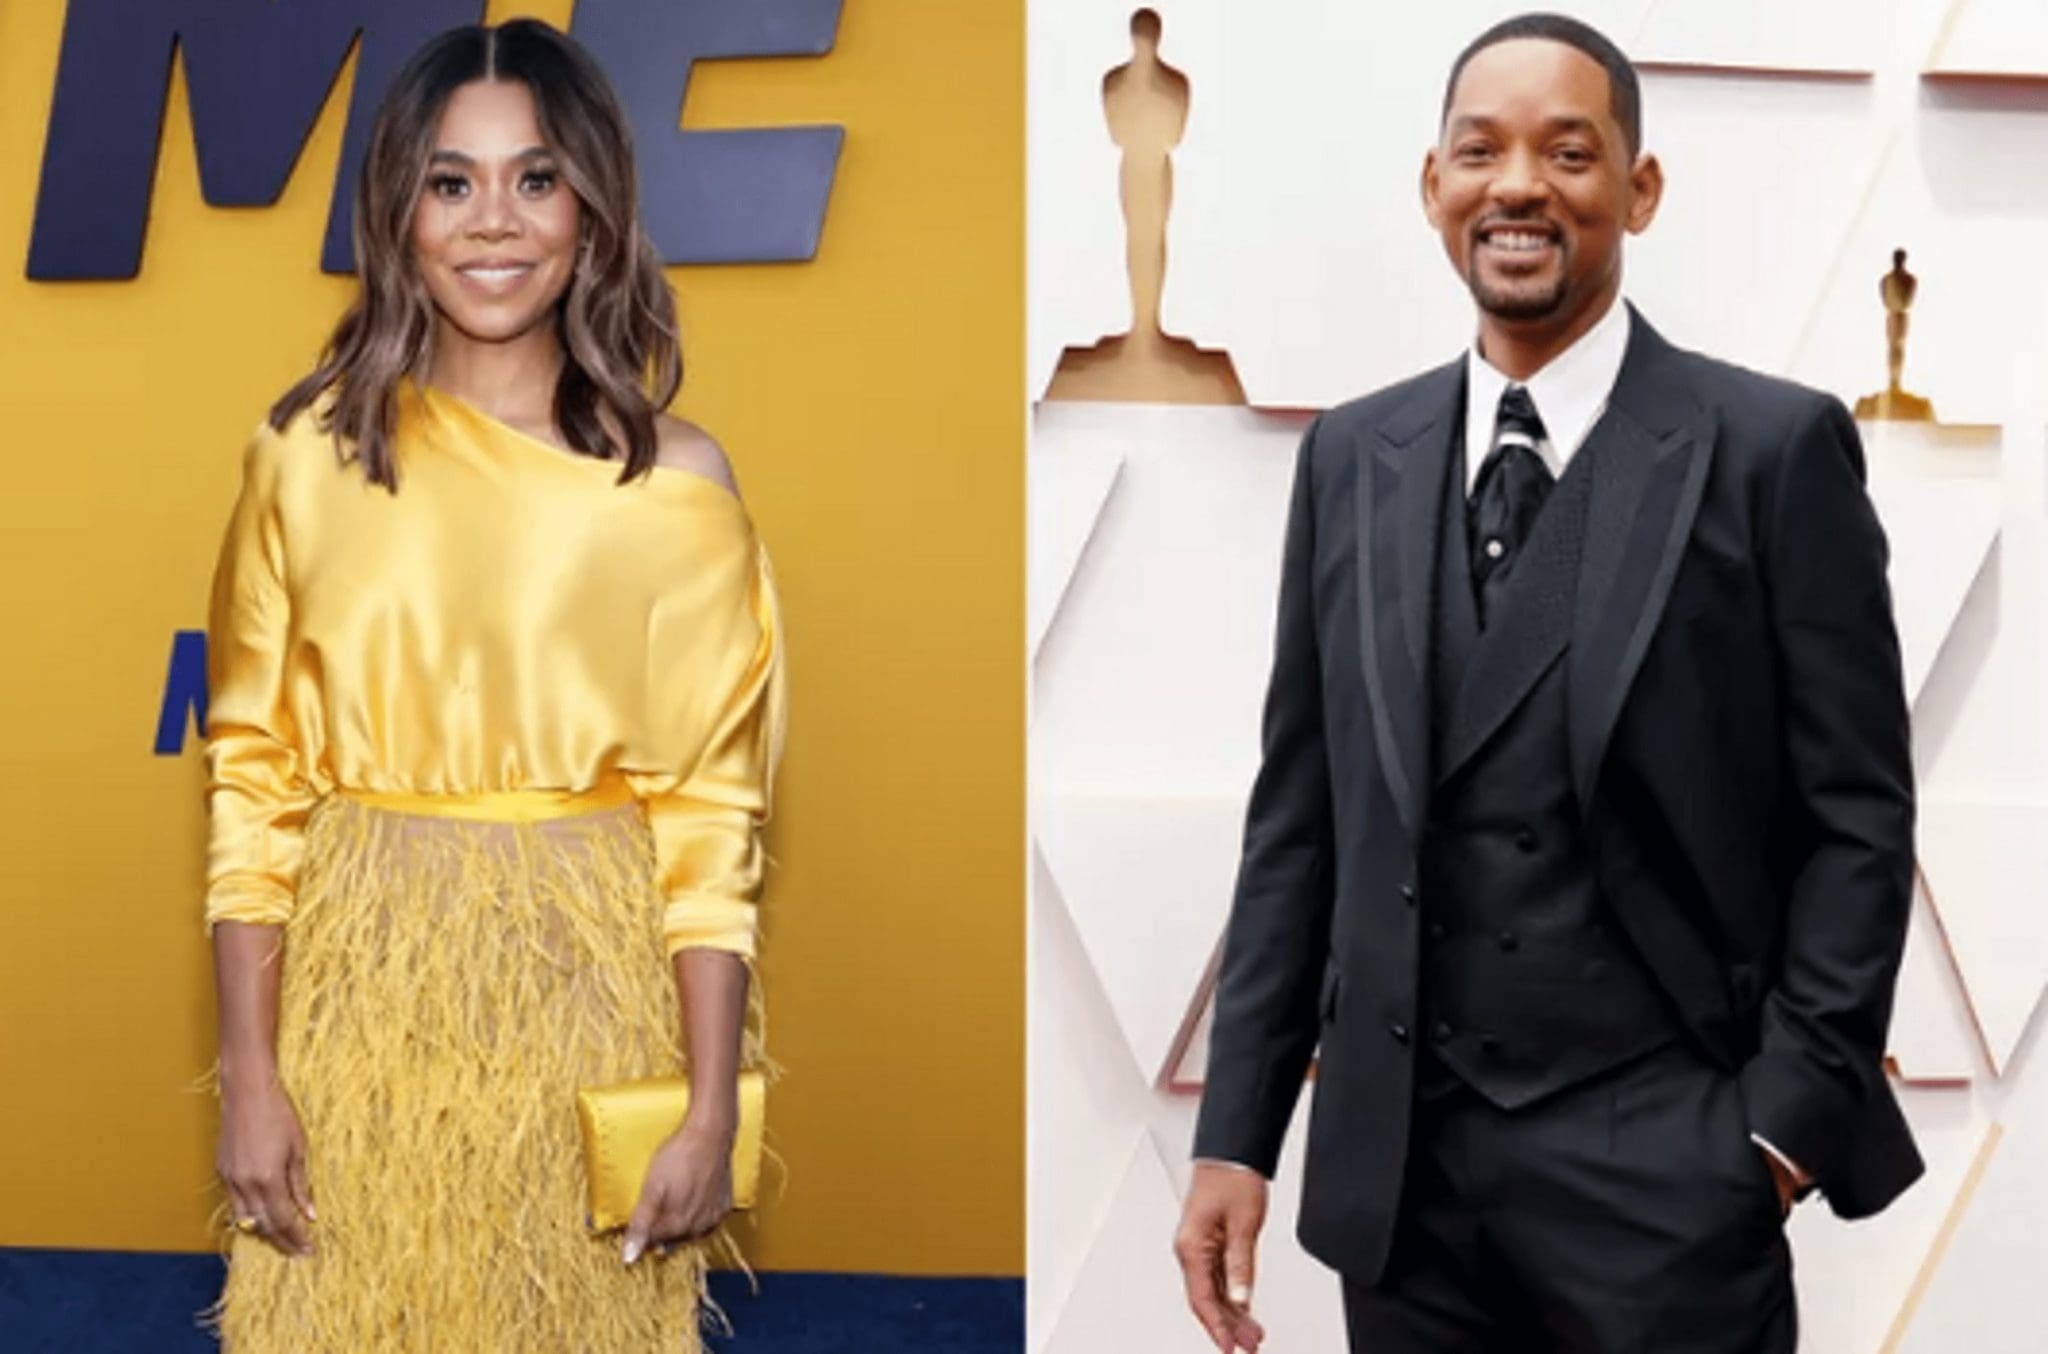 The Oscars Co-Host Regina Hall Commented On Will Smith's Public Apology To Chris Rock, Stating, I Understand It Wasn't Easy